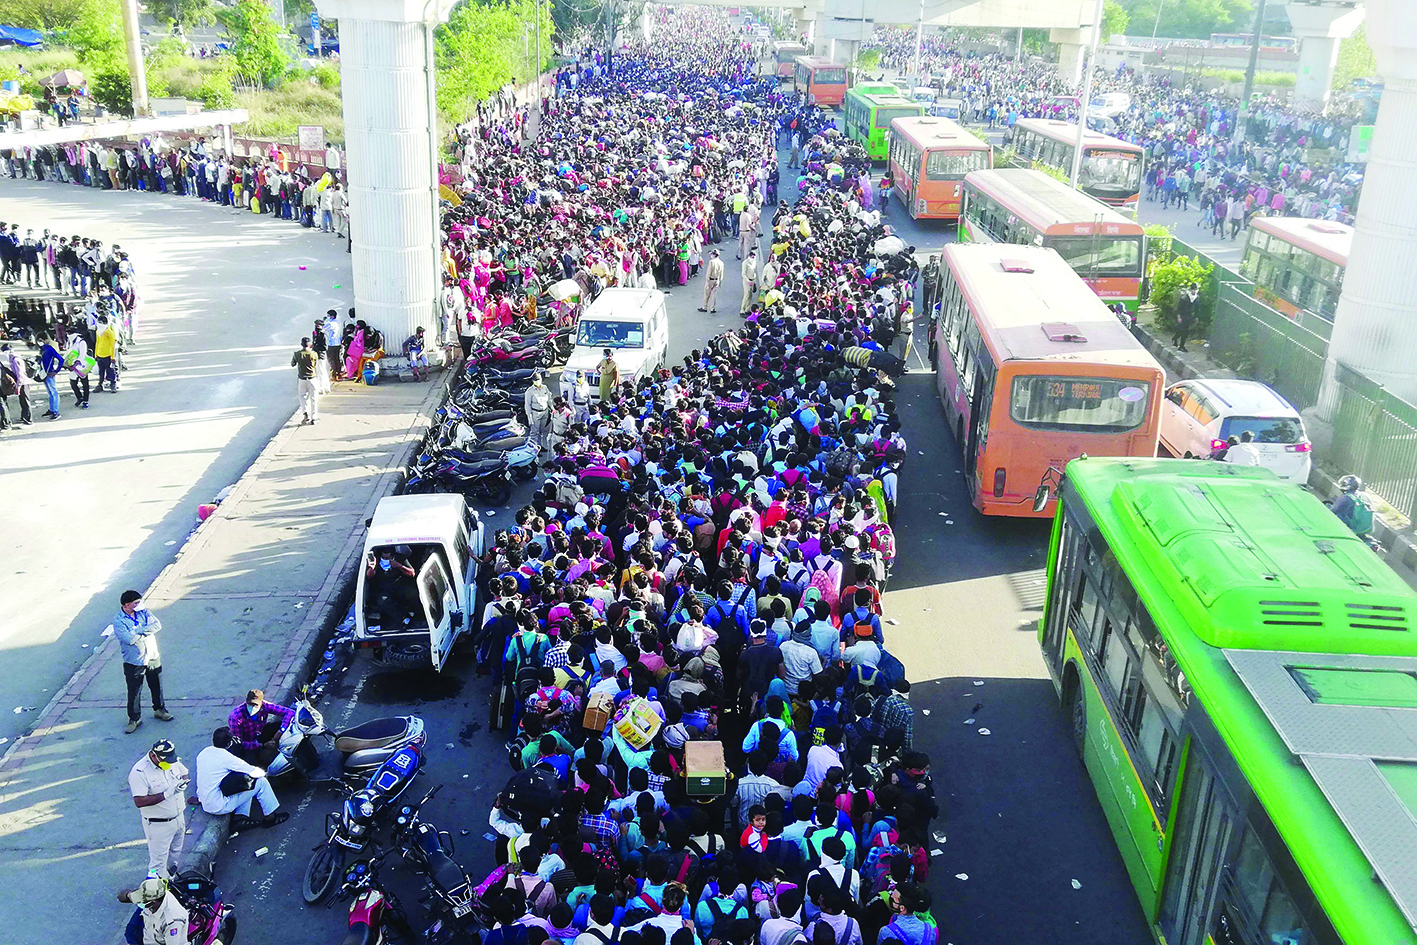 Migrant workers and their family members lineup outsdie the Anand Vihar bus terminal to leave for their villages during a government-imposed nationwide lockdown as a preventive measure against the COVID-19 coronavirus in New Delhi on March 28, 2020. - Tens of thousands of migrant workers and their famiies on March 28 fought and shoved their way onto buses organised by India's most populous state to get them to their home towns amid the coronavirus pandemic. (Photo by Bhuvan BAGGA / AFP)